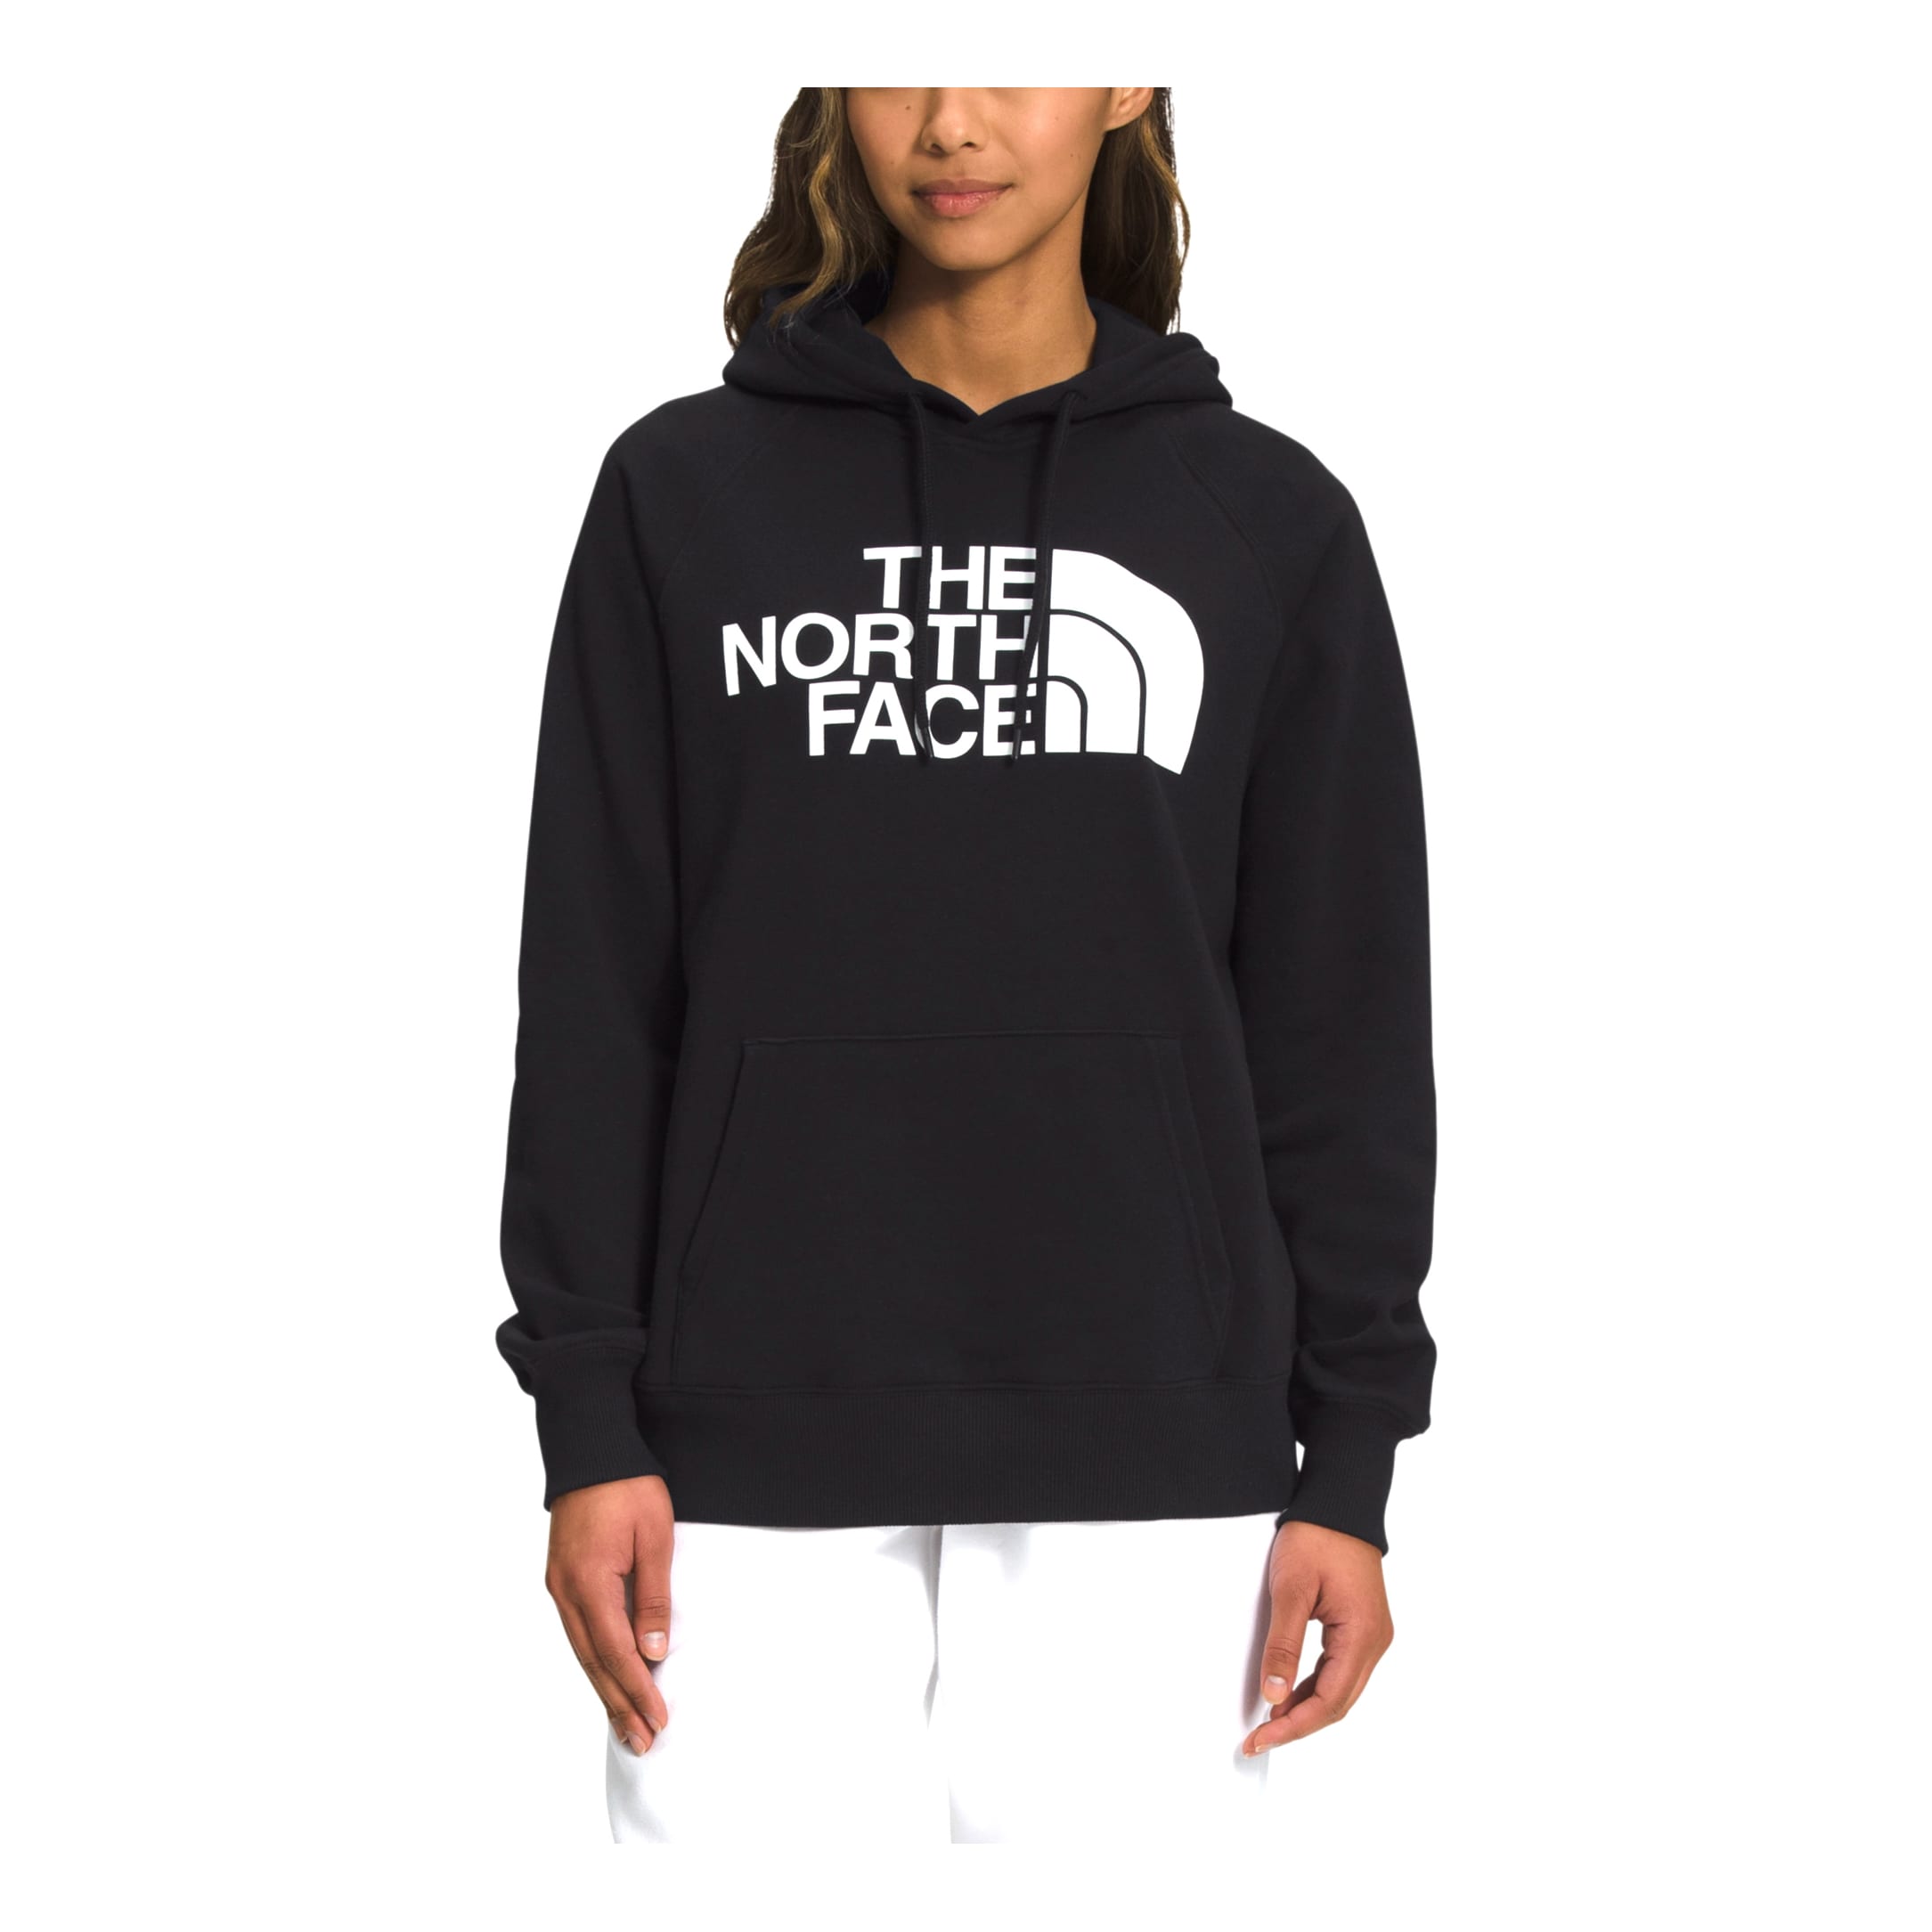 The North Face® Women's Half Dome Hoodie